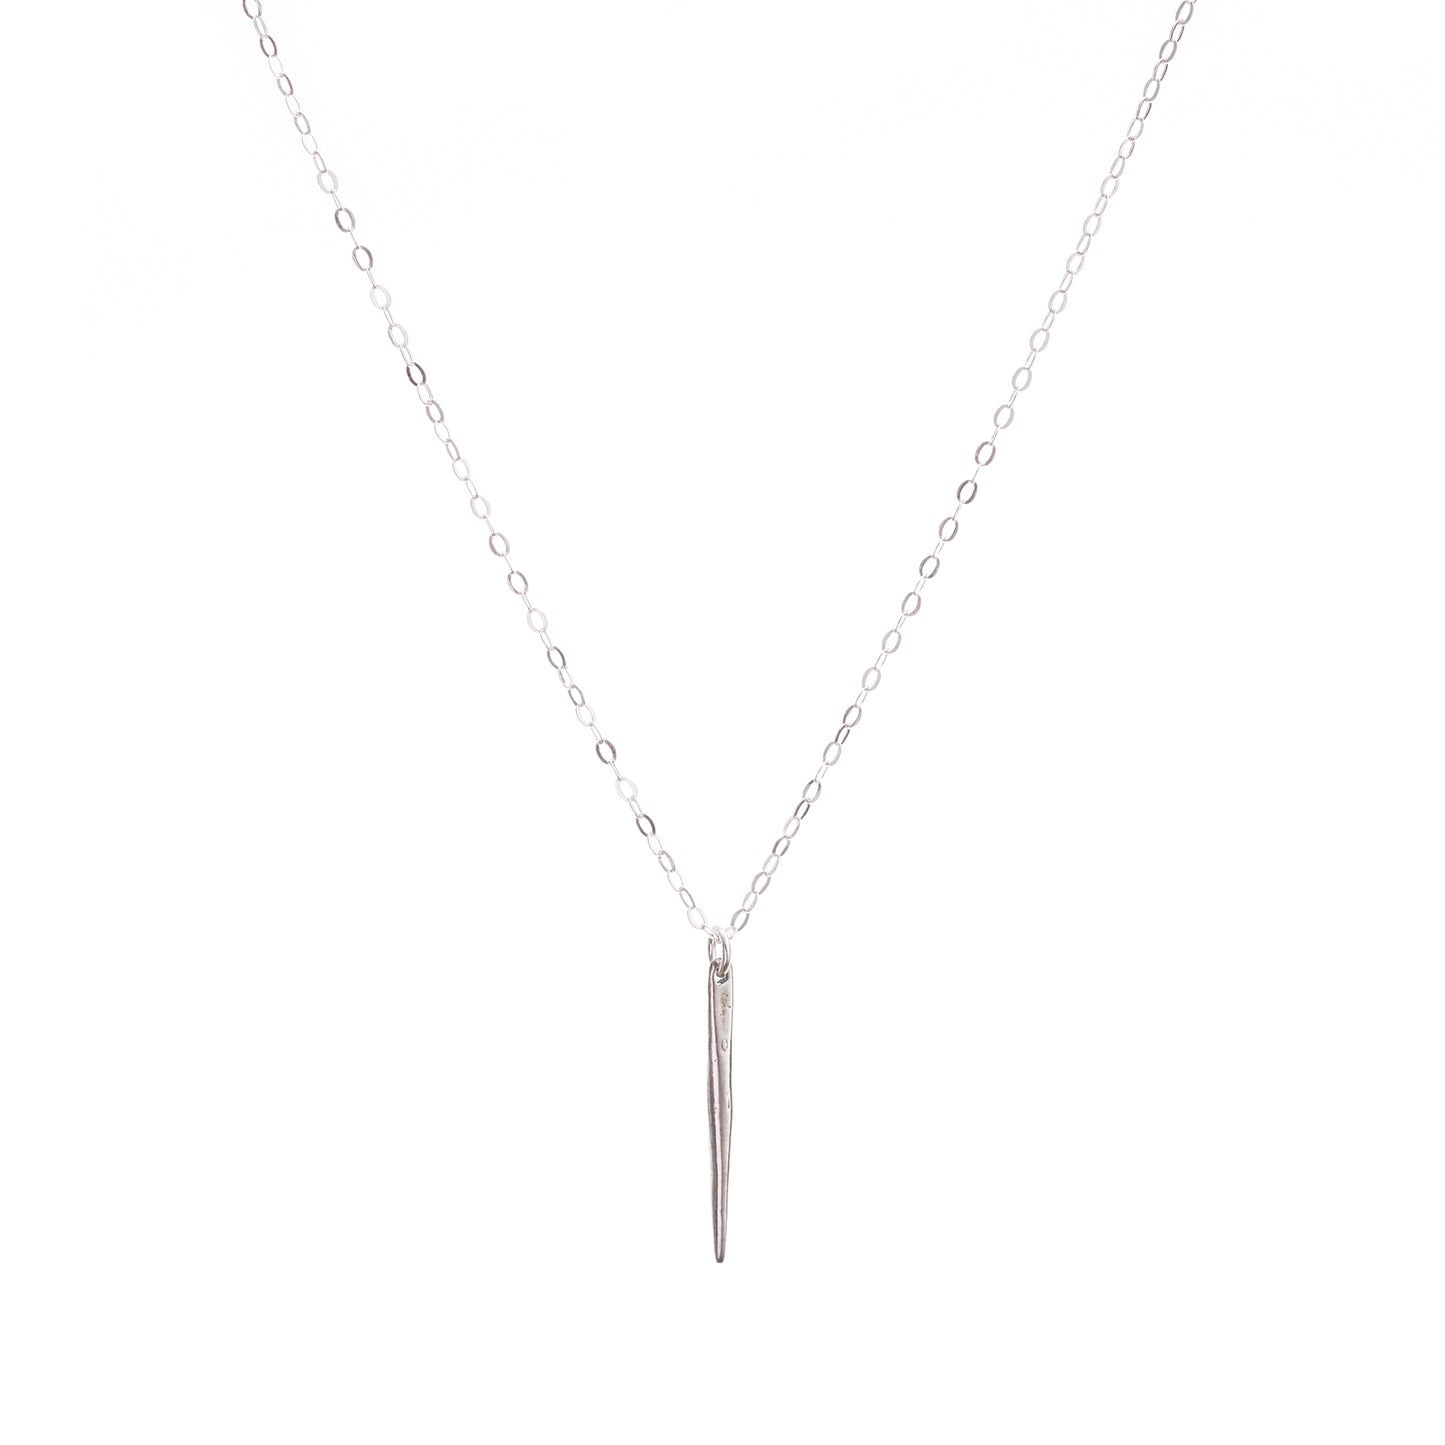 Minimal Silver Needle Spike Necklace